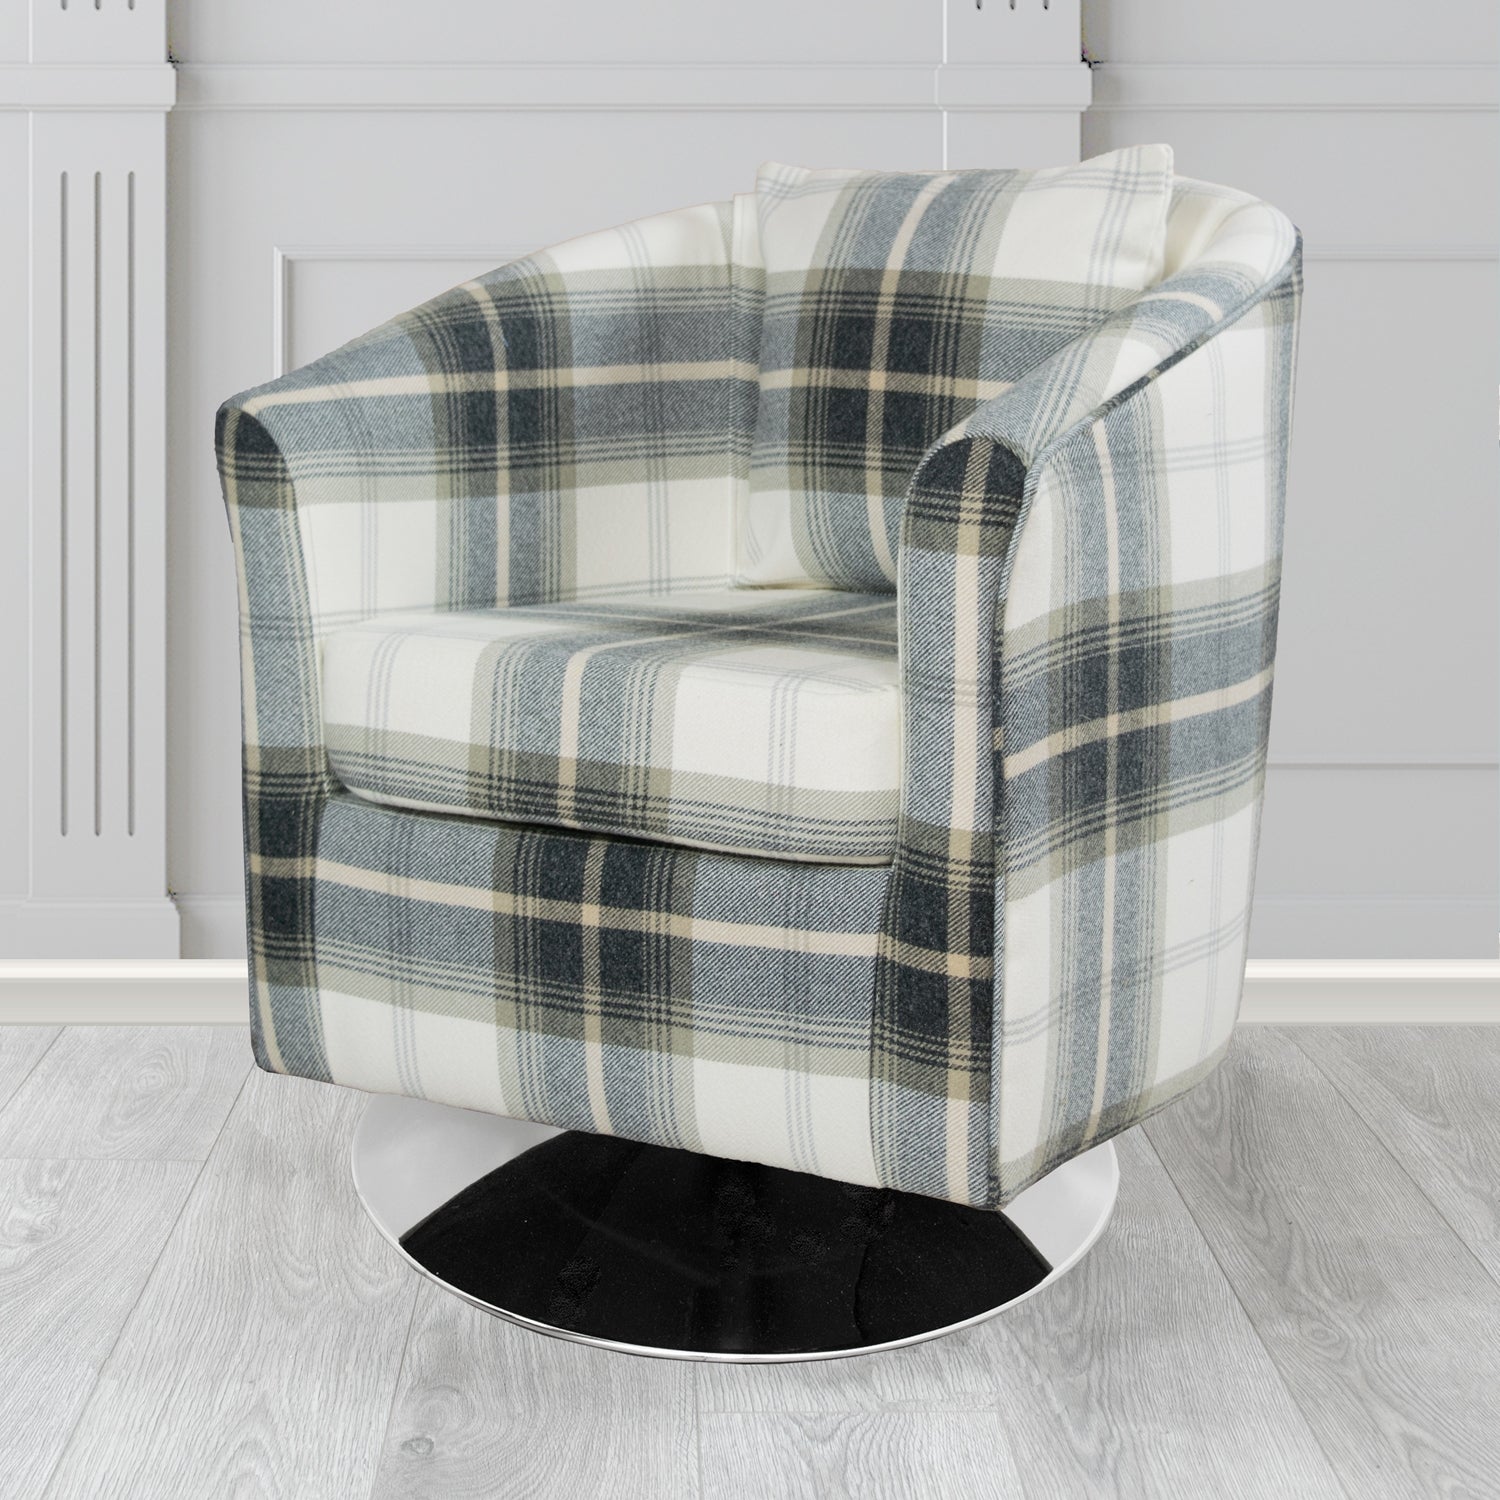 St Tropez Balmoral Charcoal Tartan Fabric Swivel Tub Chair with Scatter Cushion - The Tub Chair Shop